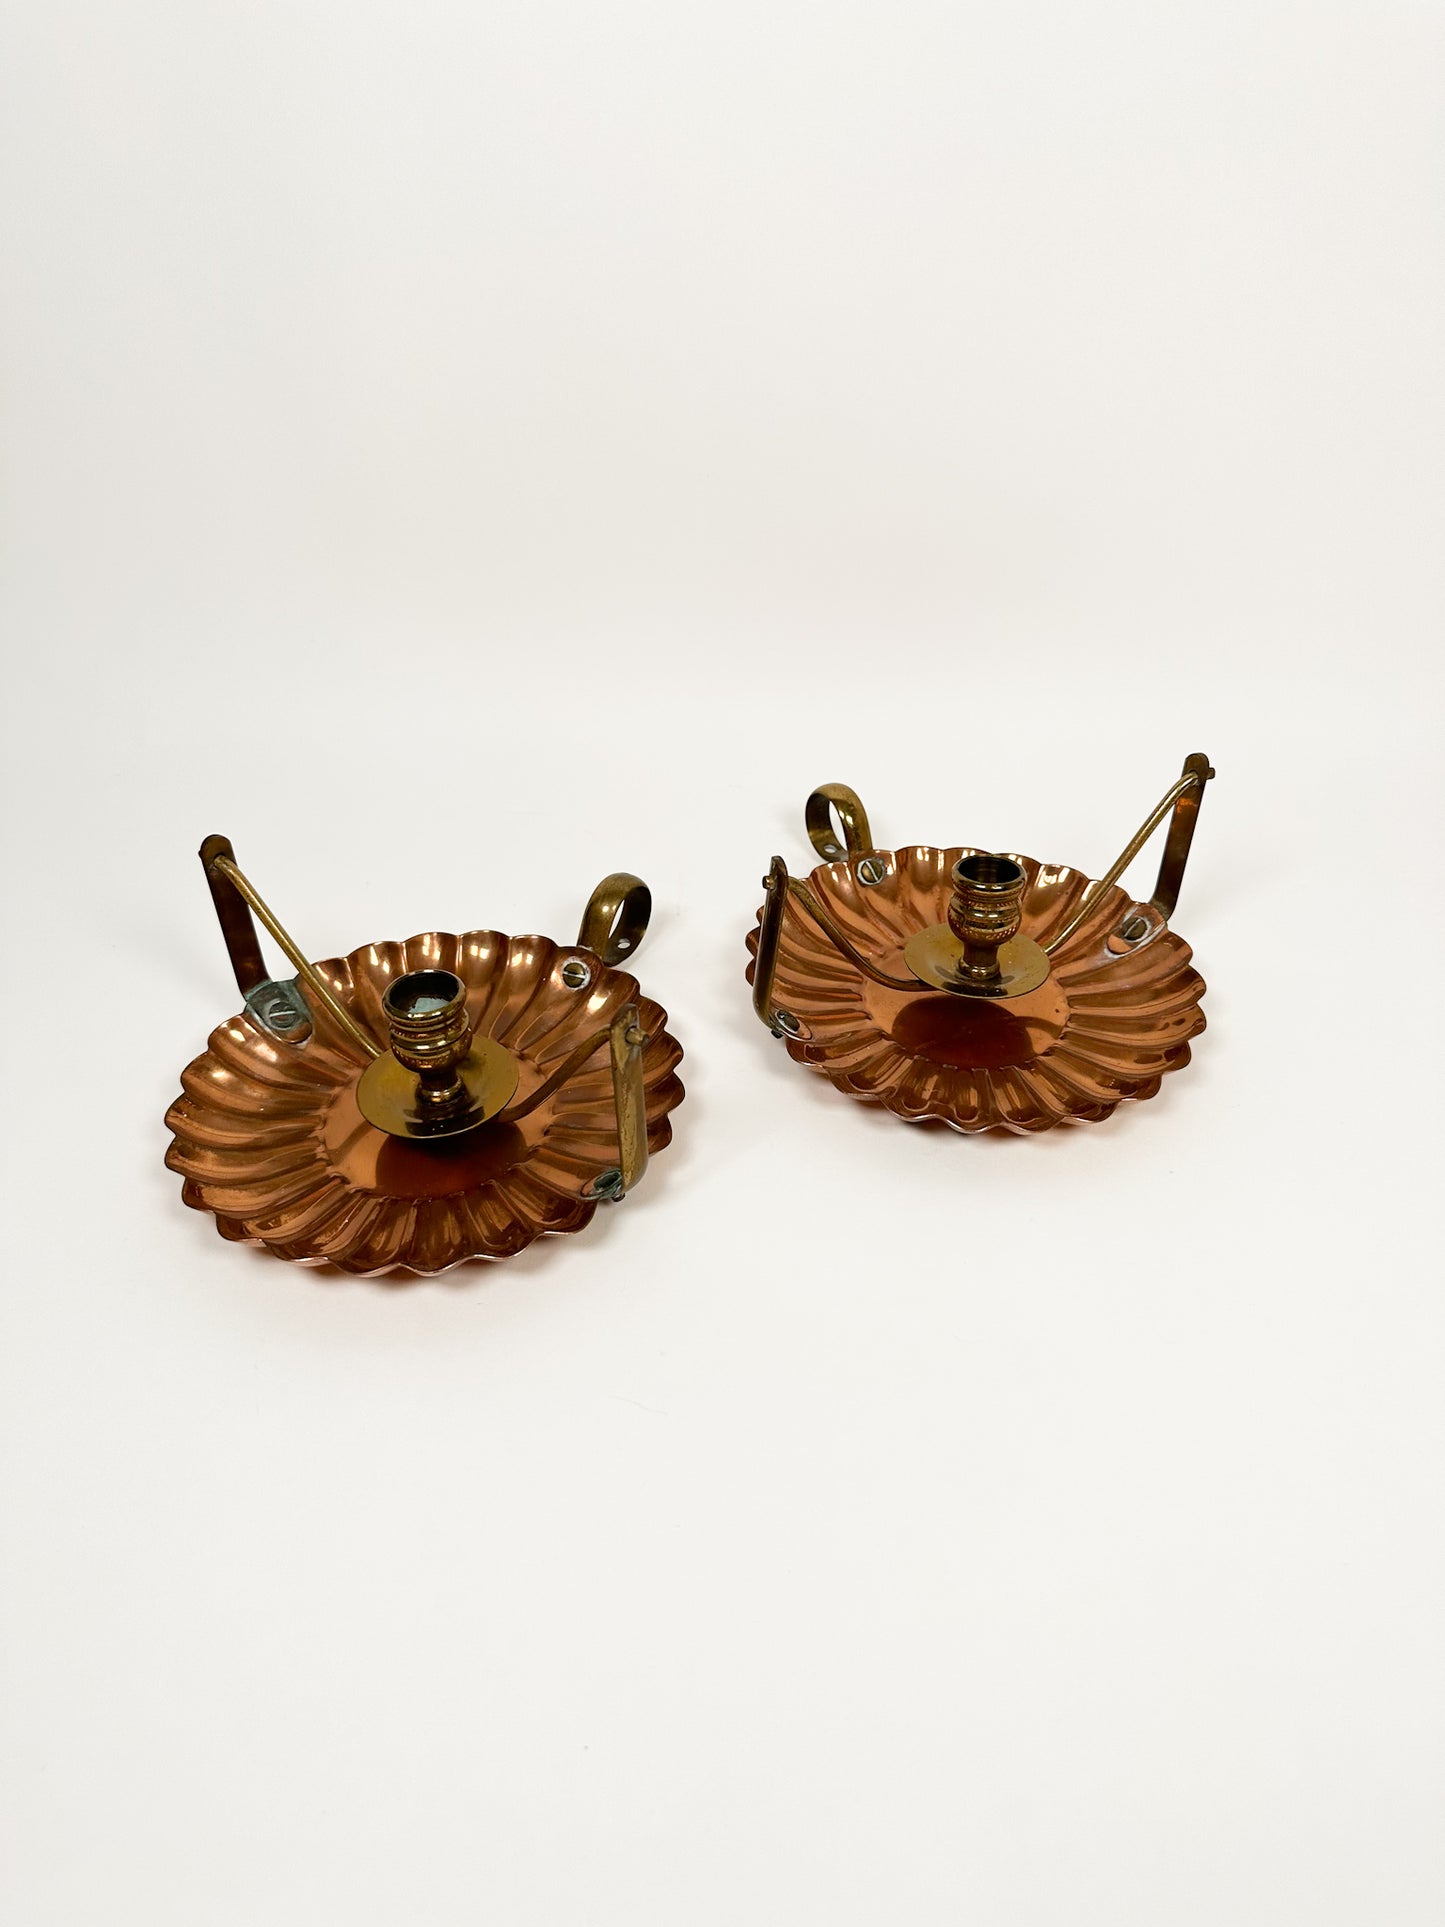 Copper Scallop Candle Holders